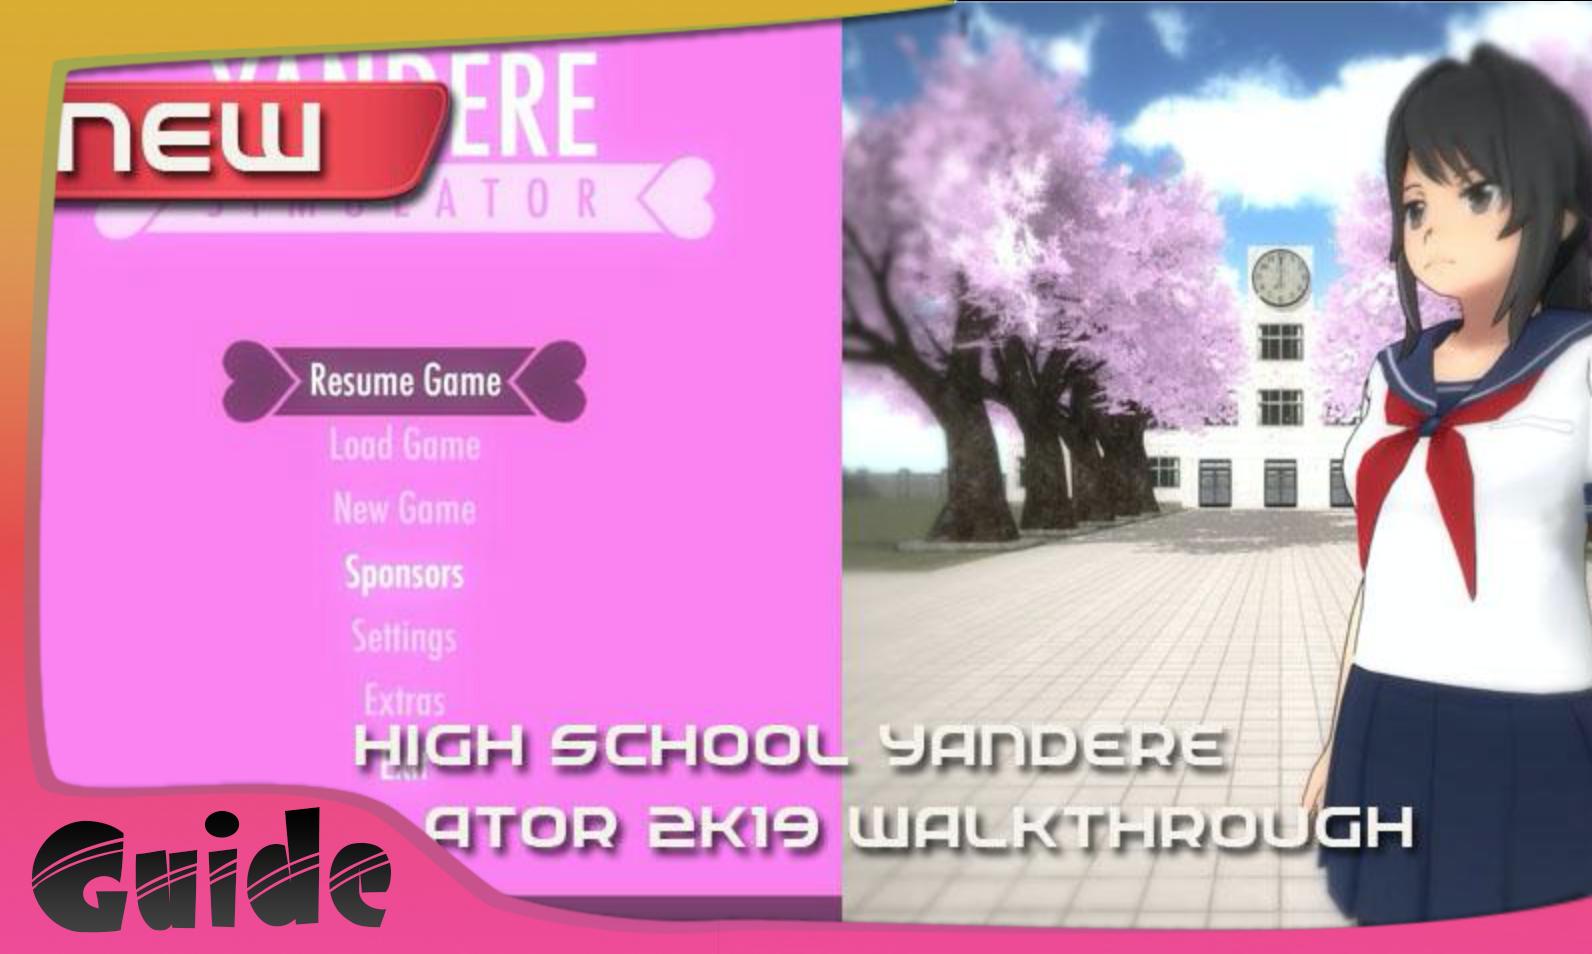 Guide For School Yandere Simulator for Android - APK Download